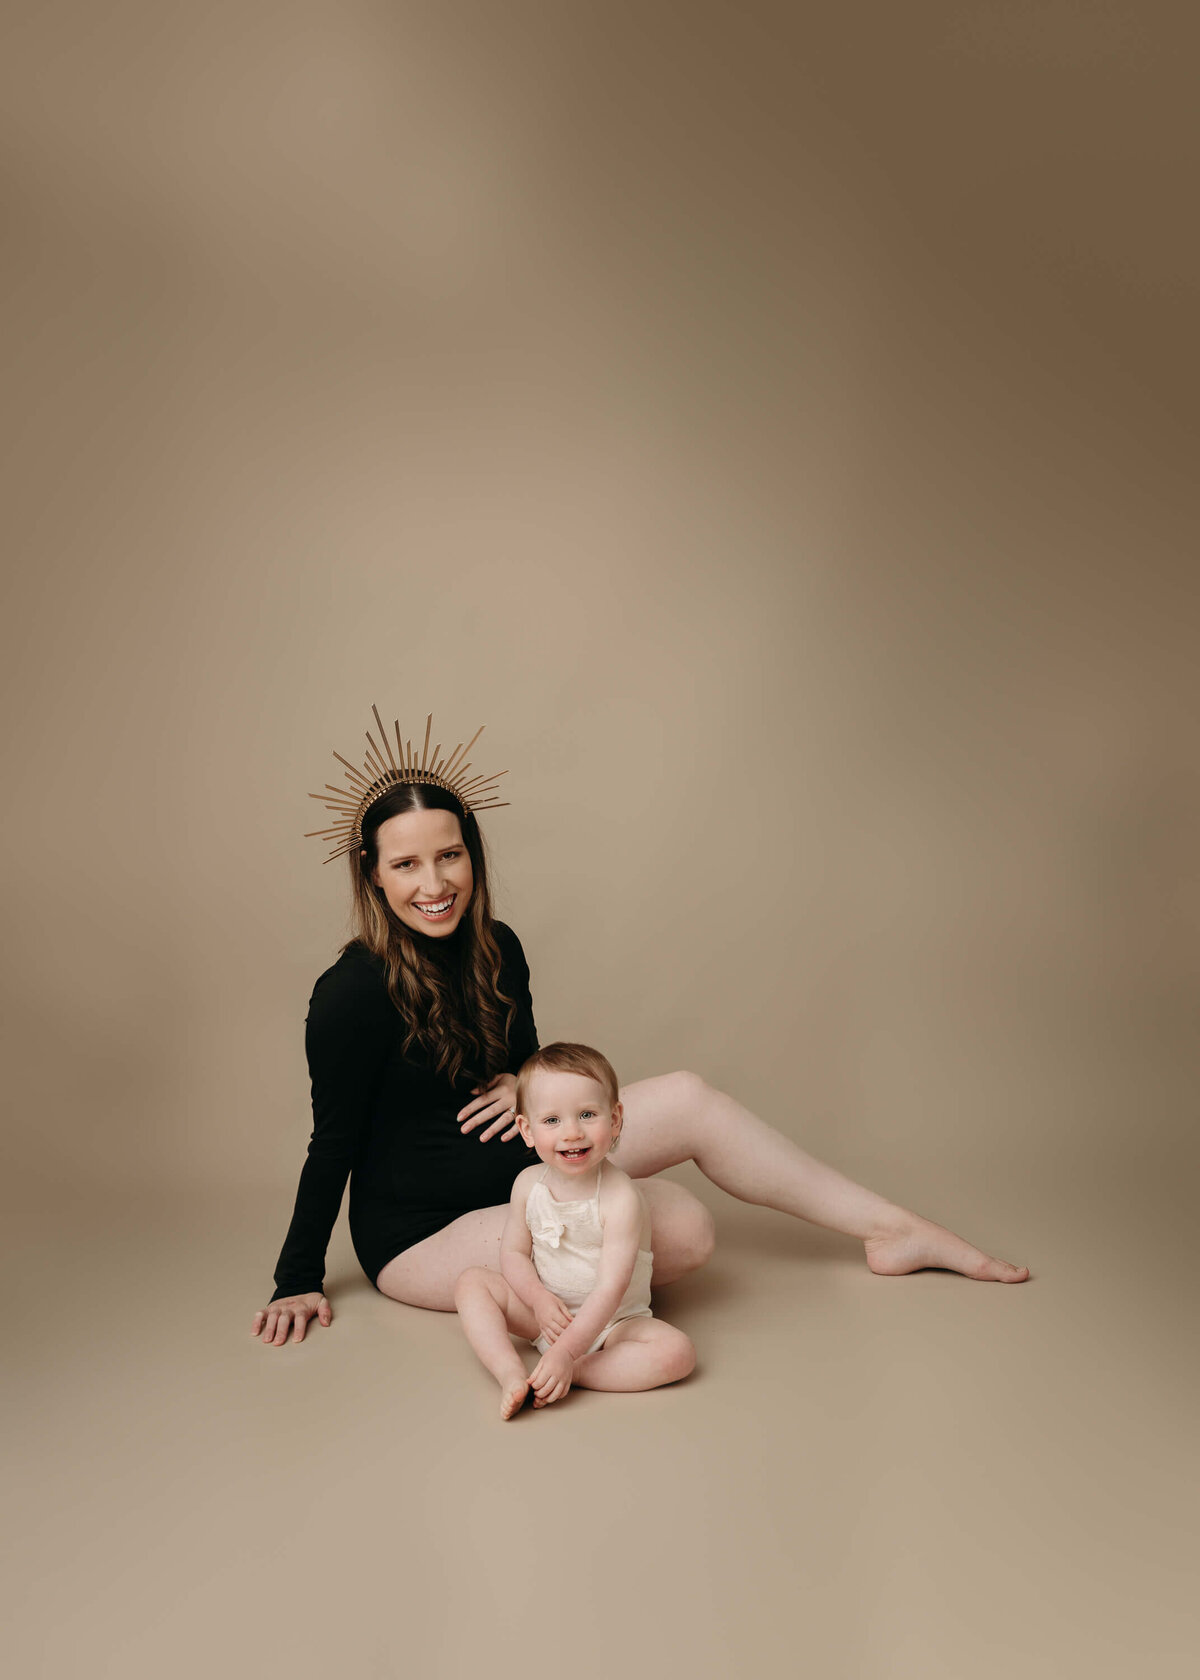 Maternity Studio Session with hair and make upWeb Res 23